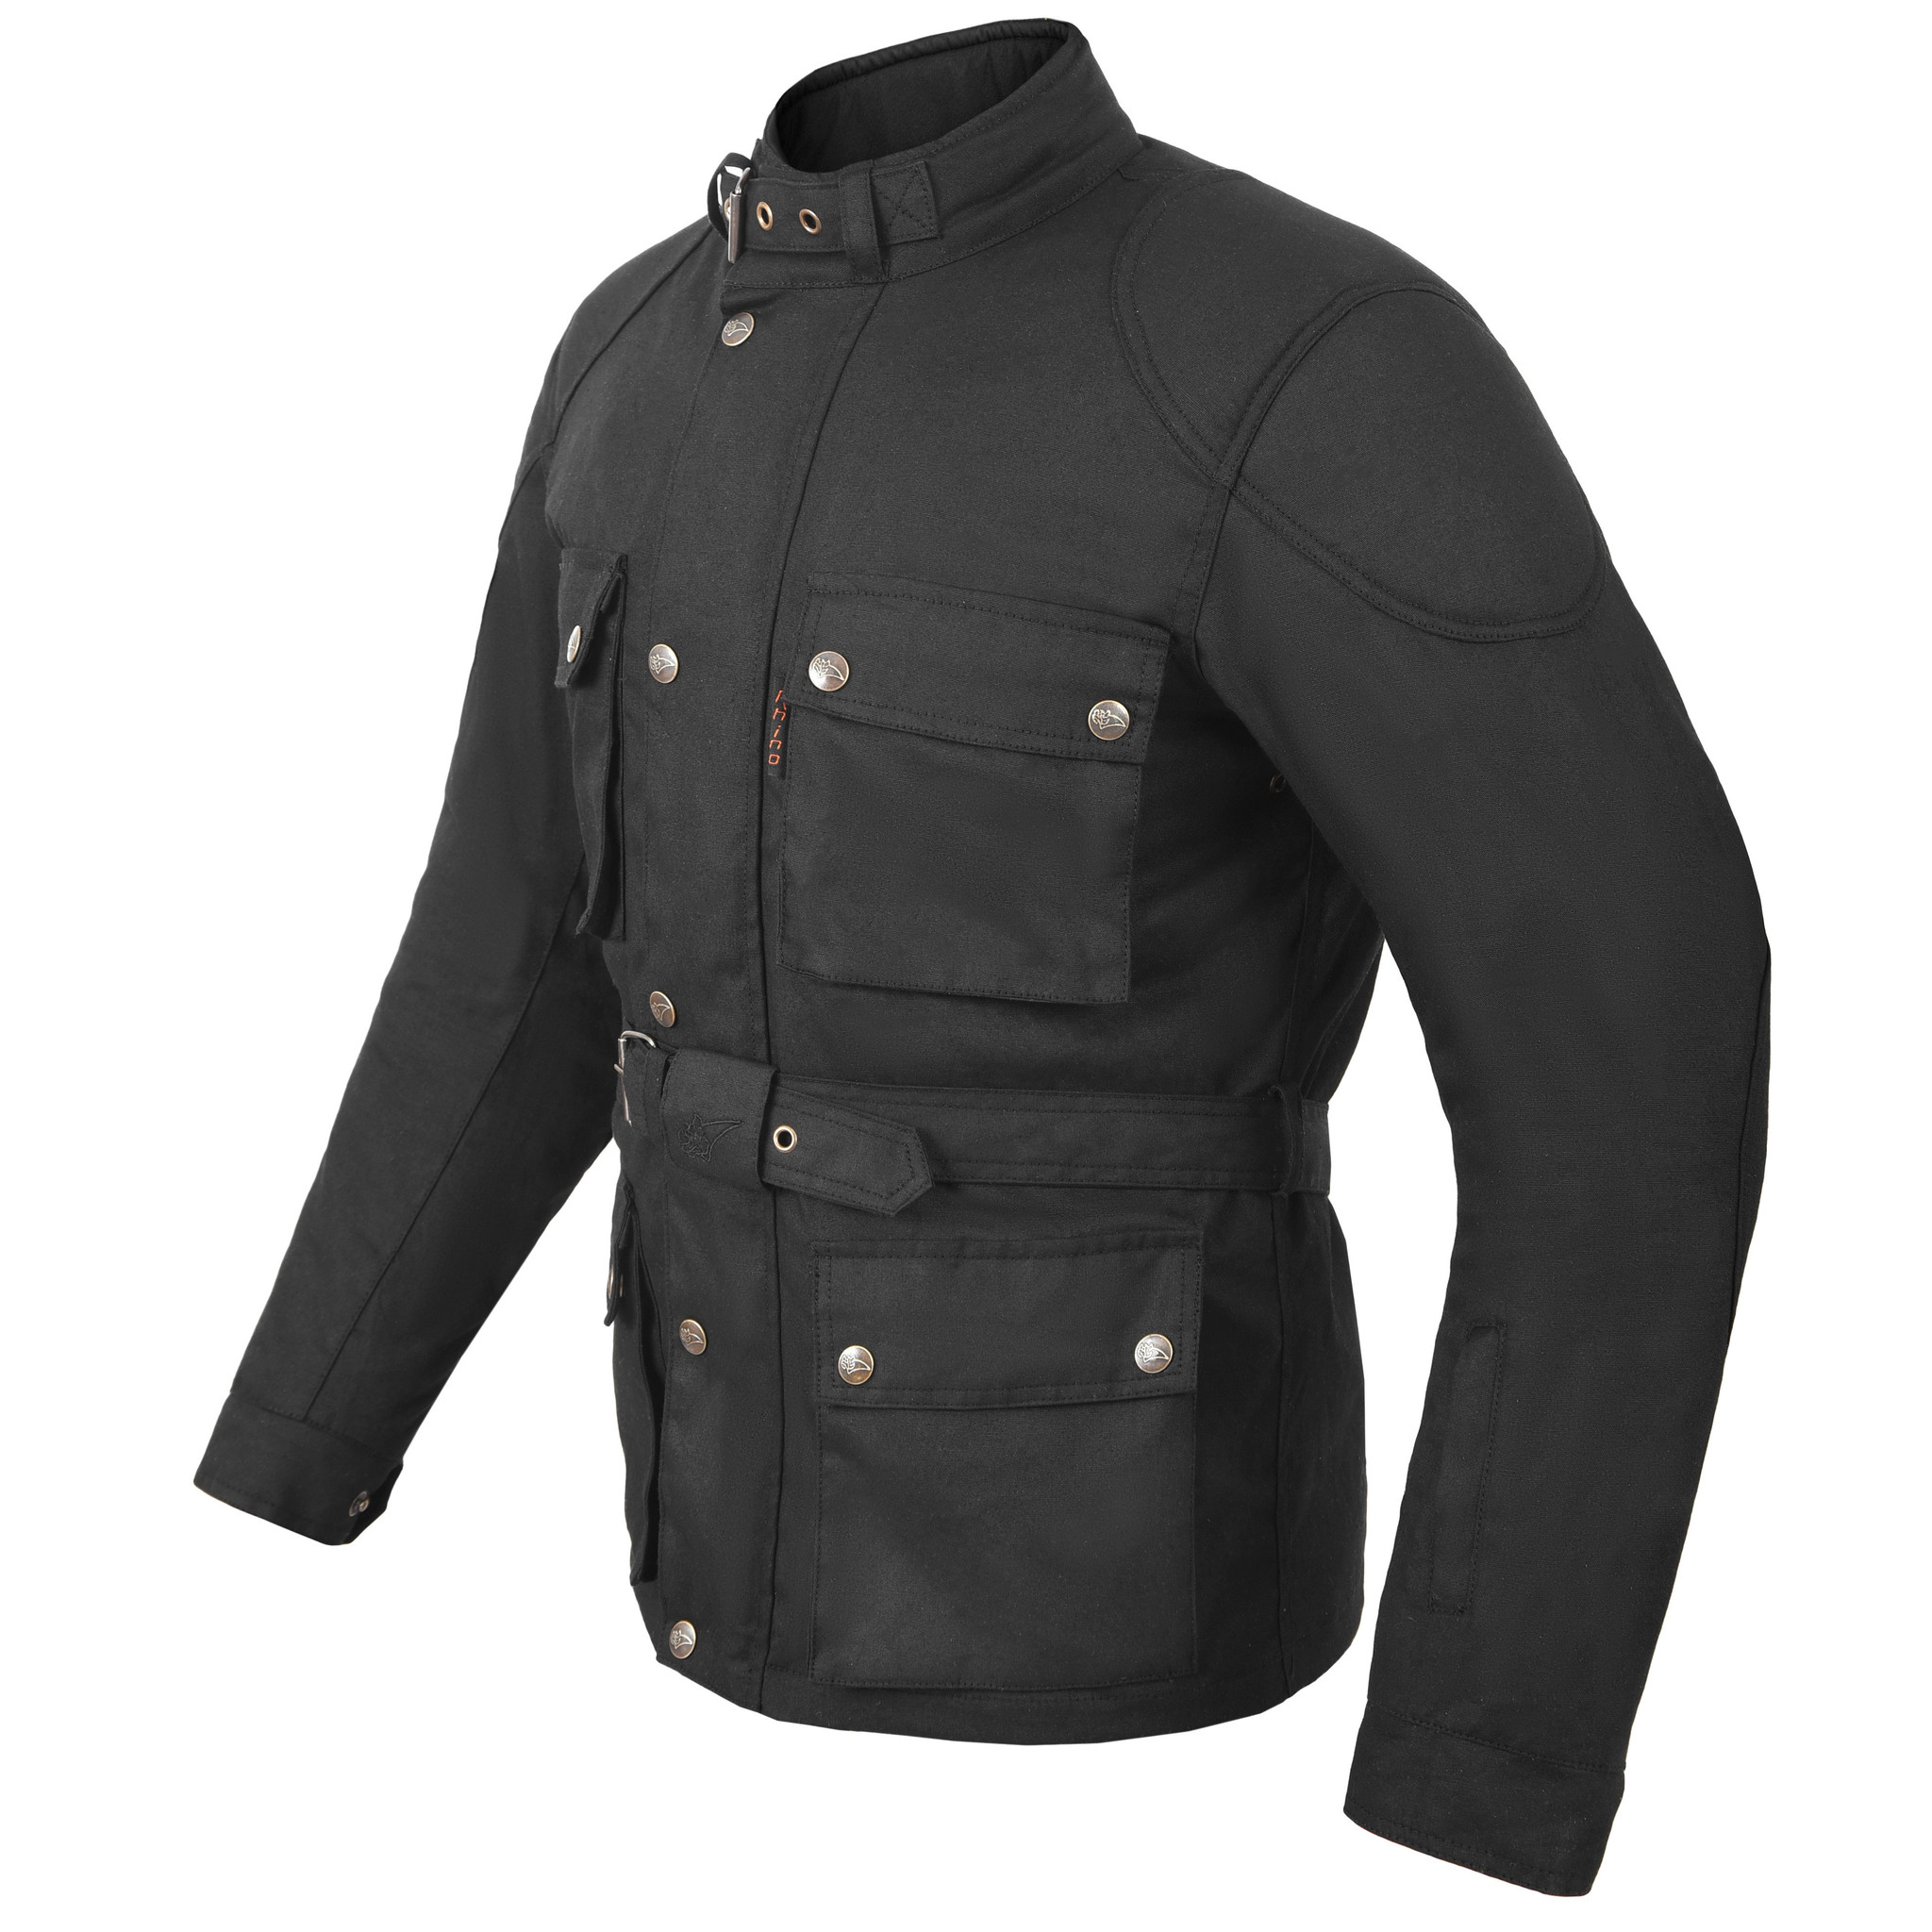 Heritage Touring Waxed Cotton Motorcycle Jacket with Armour & Vents